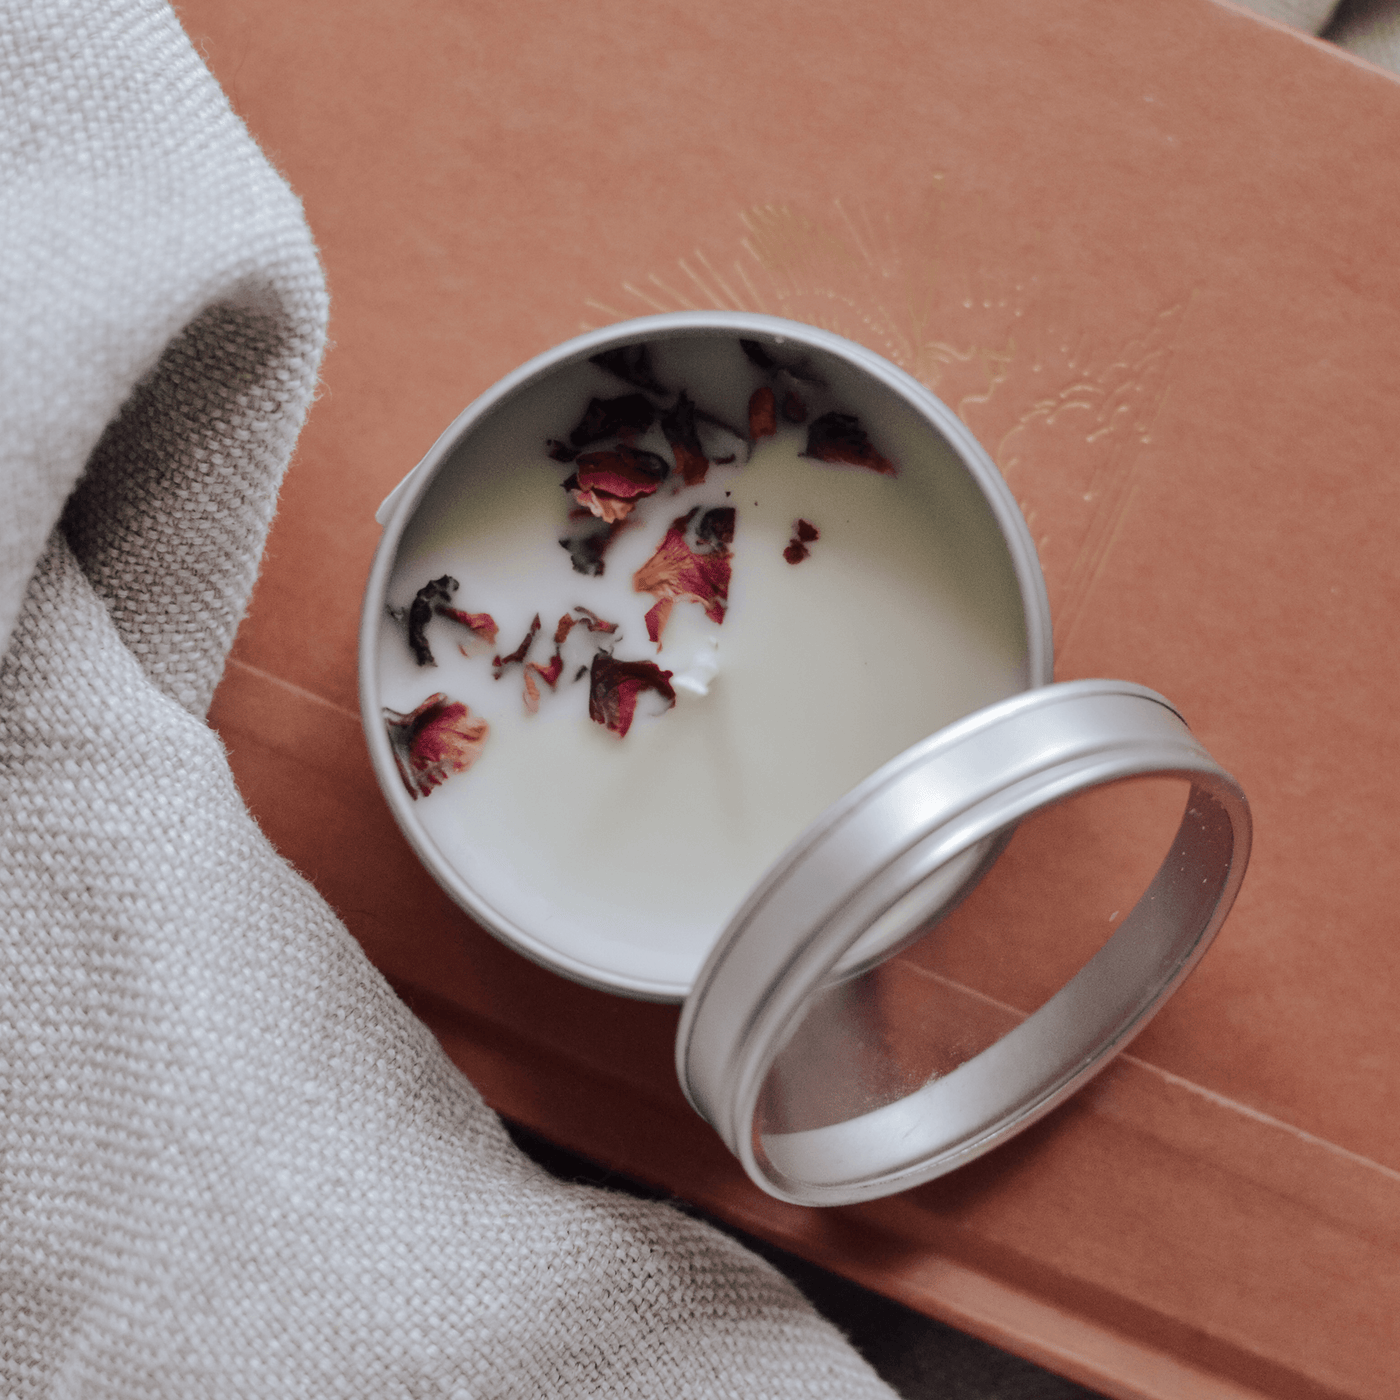 Wildrose cranberry handmade soy candle with lid.